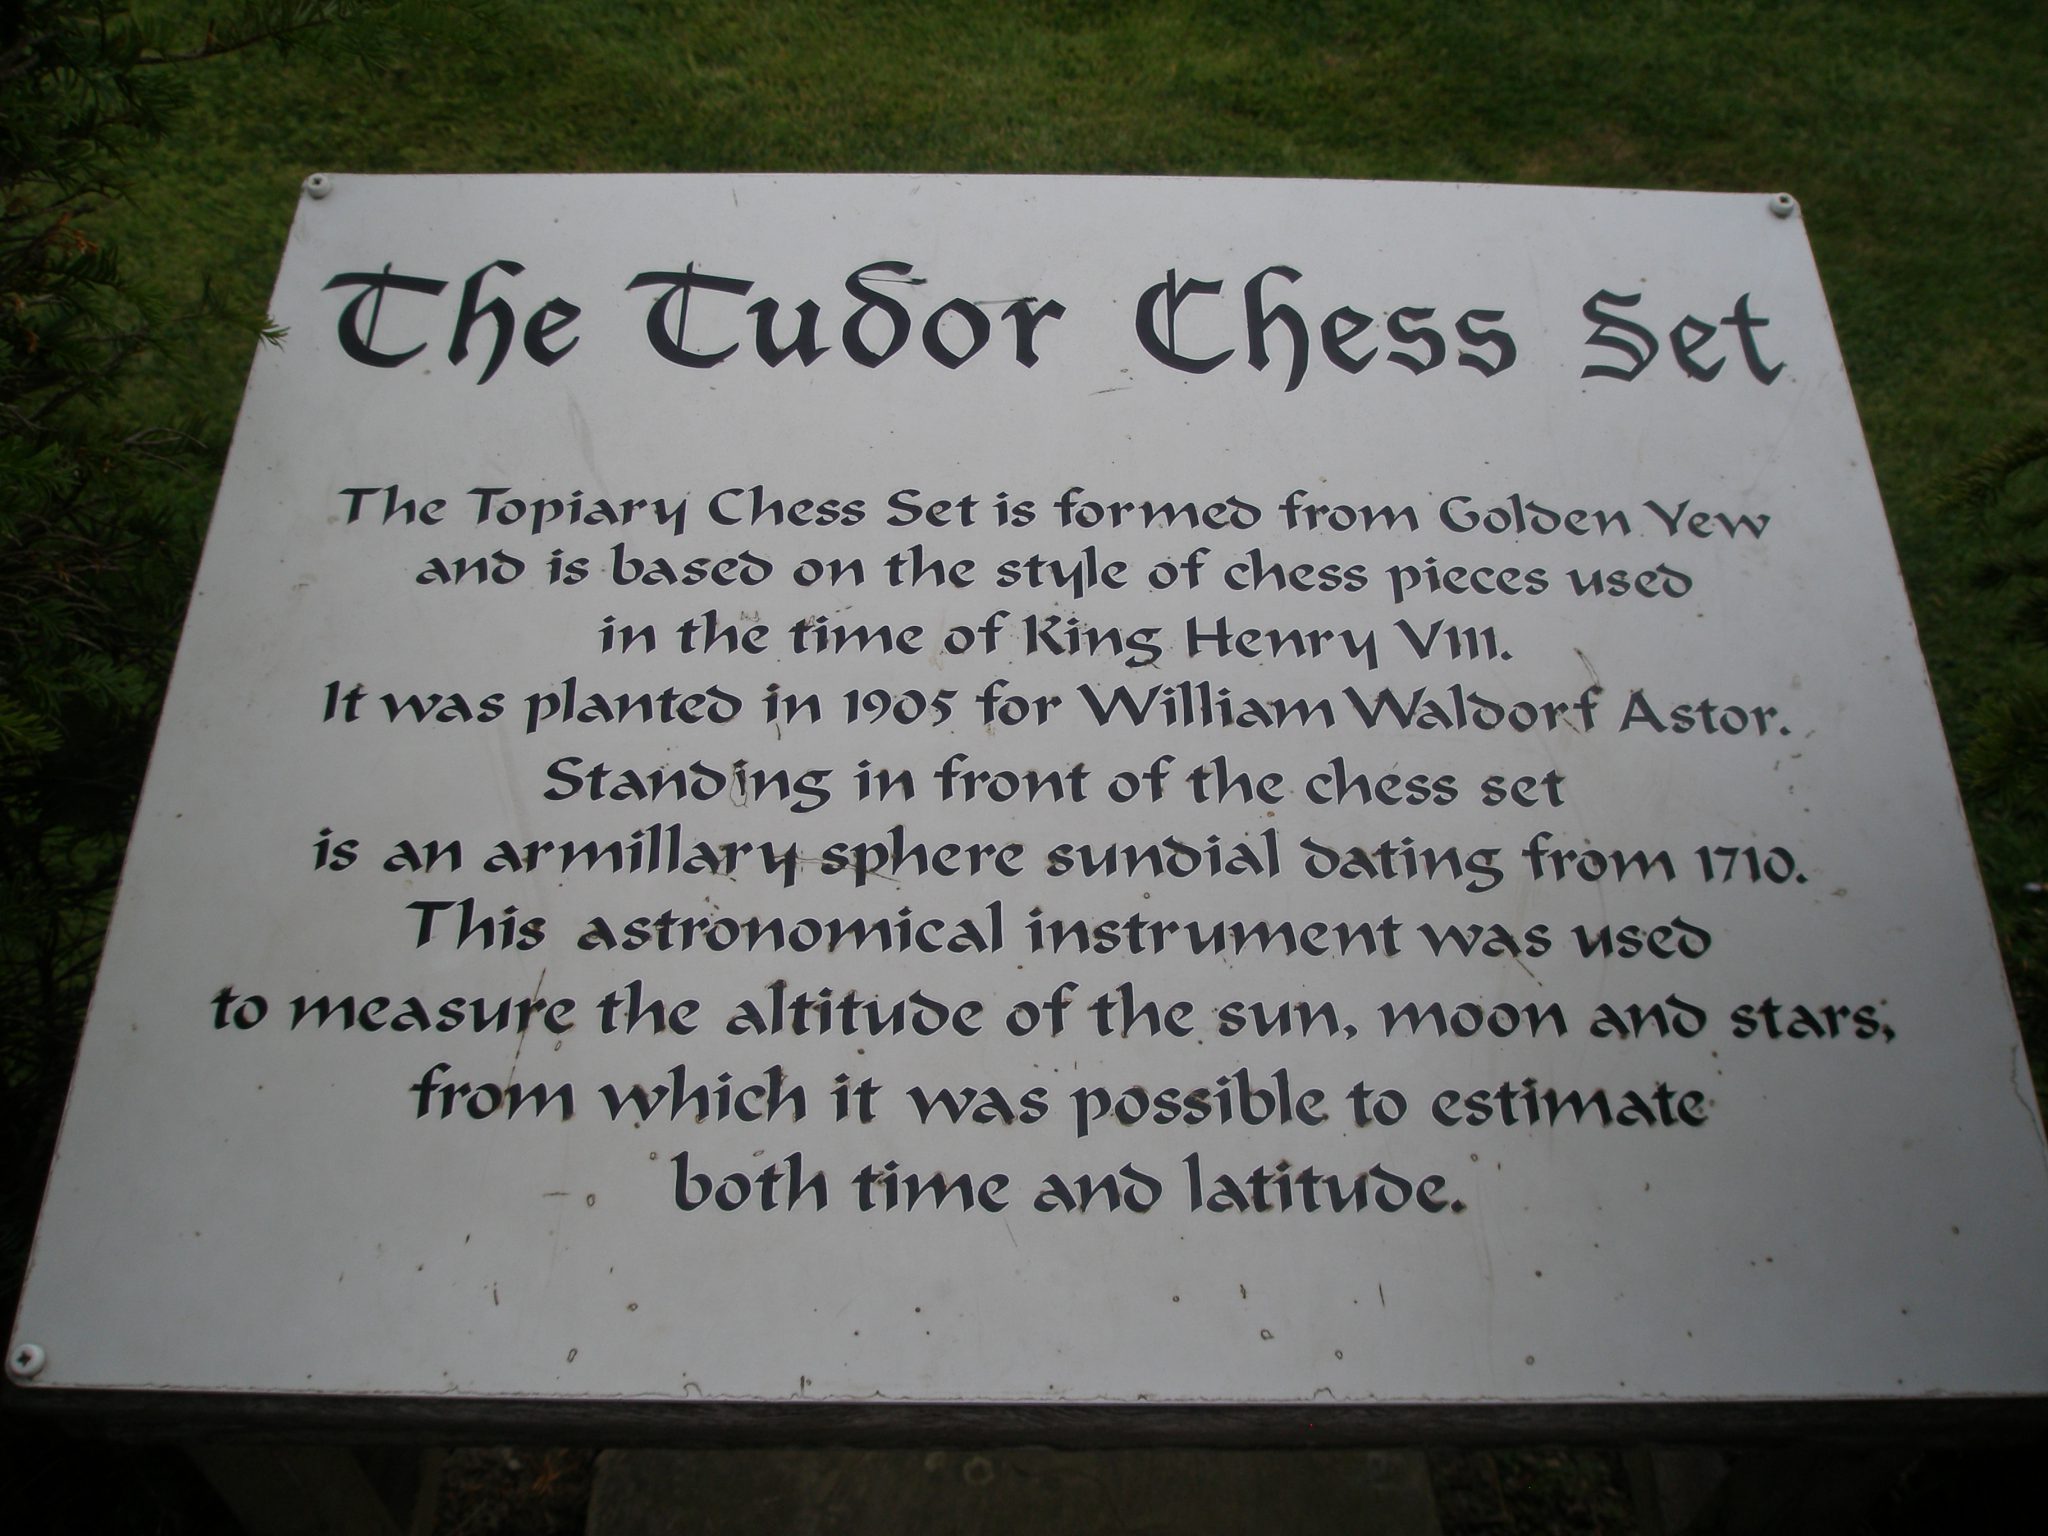 Astor installed the Chess Set